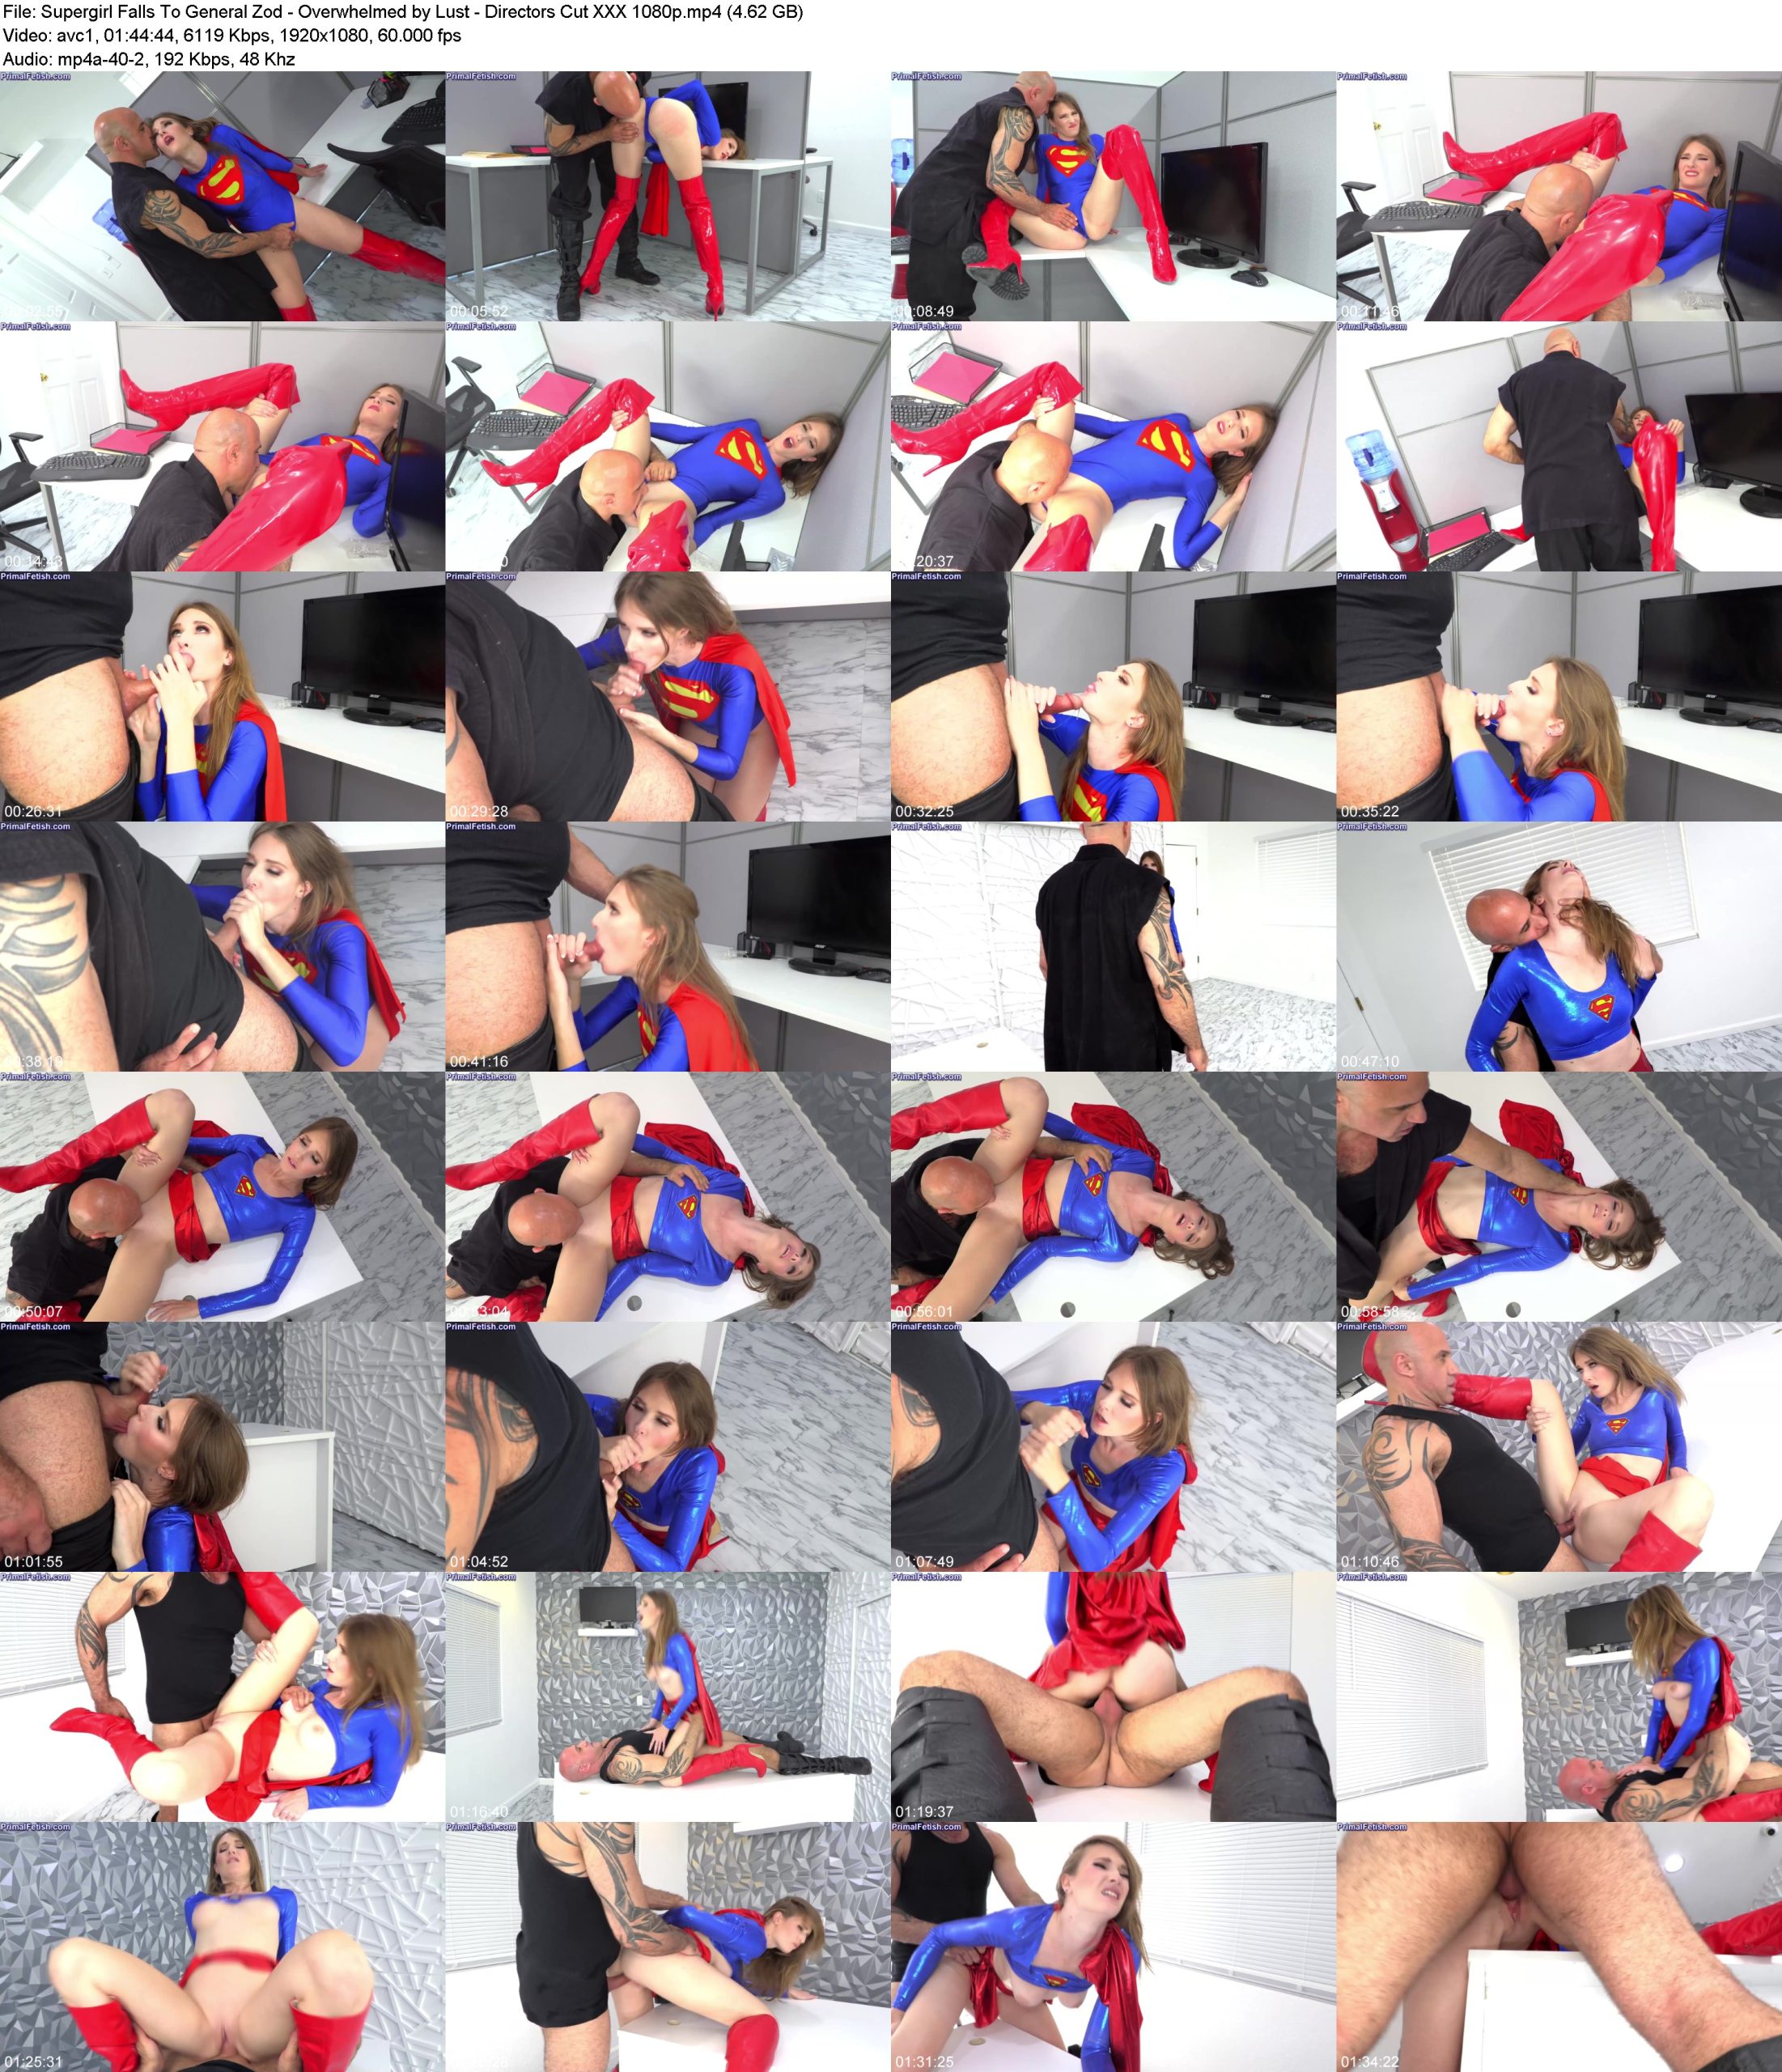 Supergirl_Falls_To_General_Zod_-_Overwhelmed_by_Lust_-_Directors_Cut_XXX_1080p.jpg